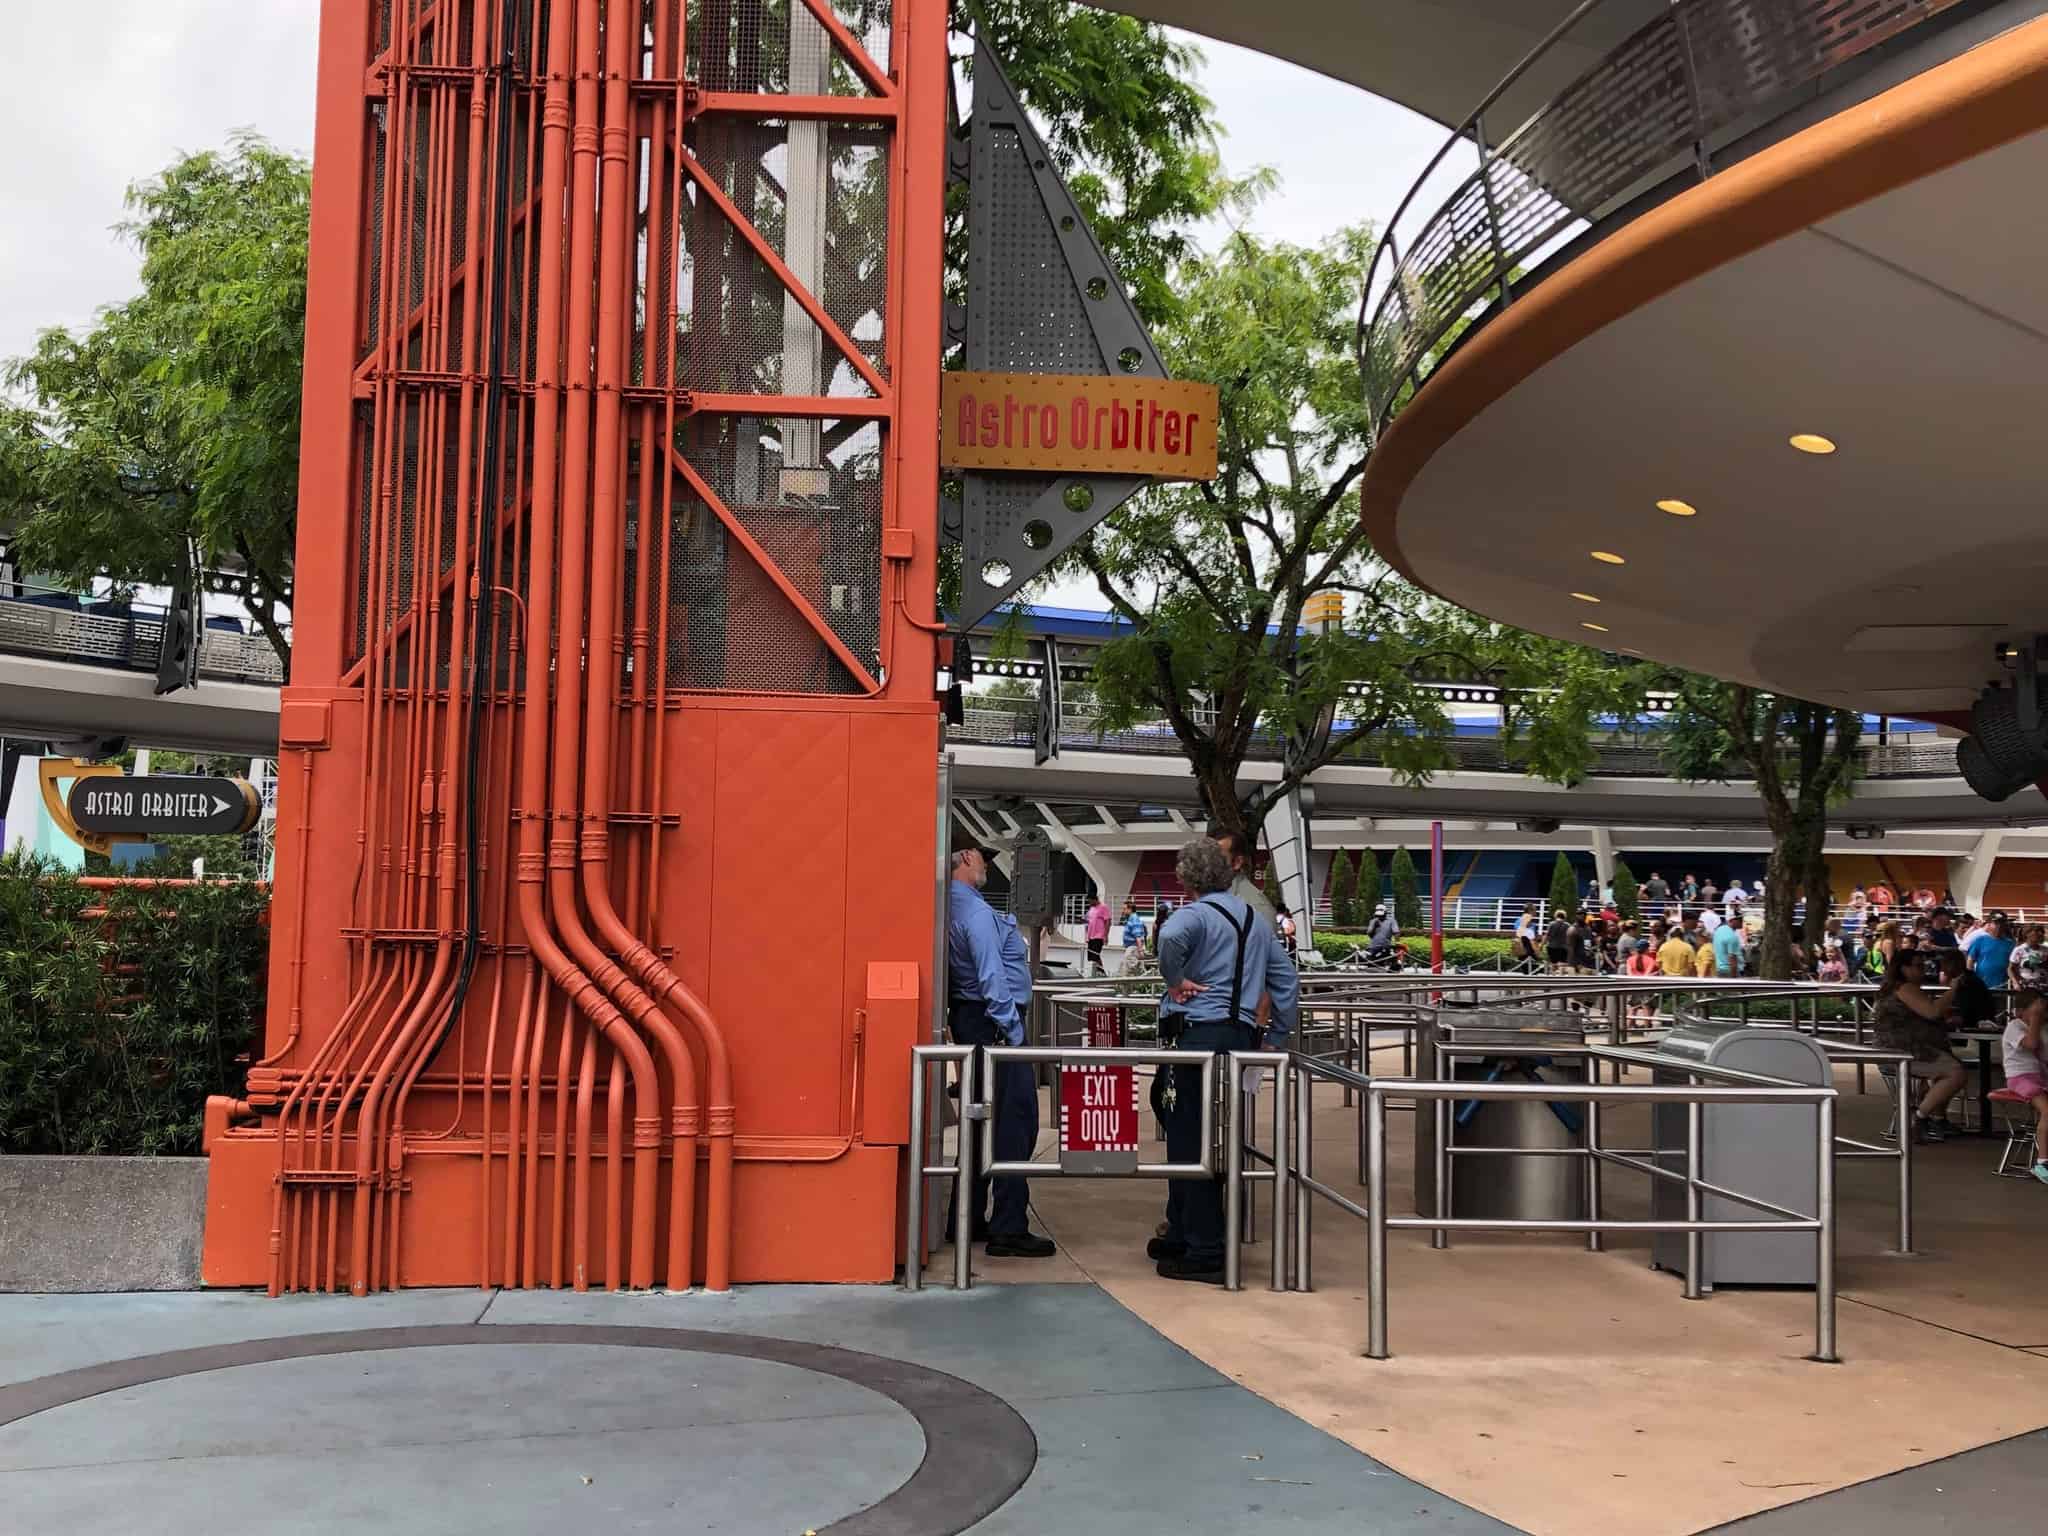 Maintenance cast members can be seen all around the attraction.